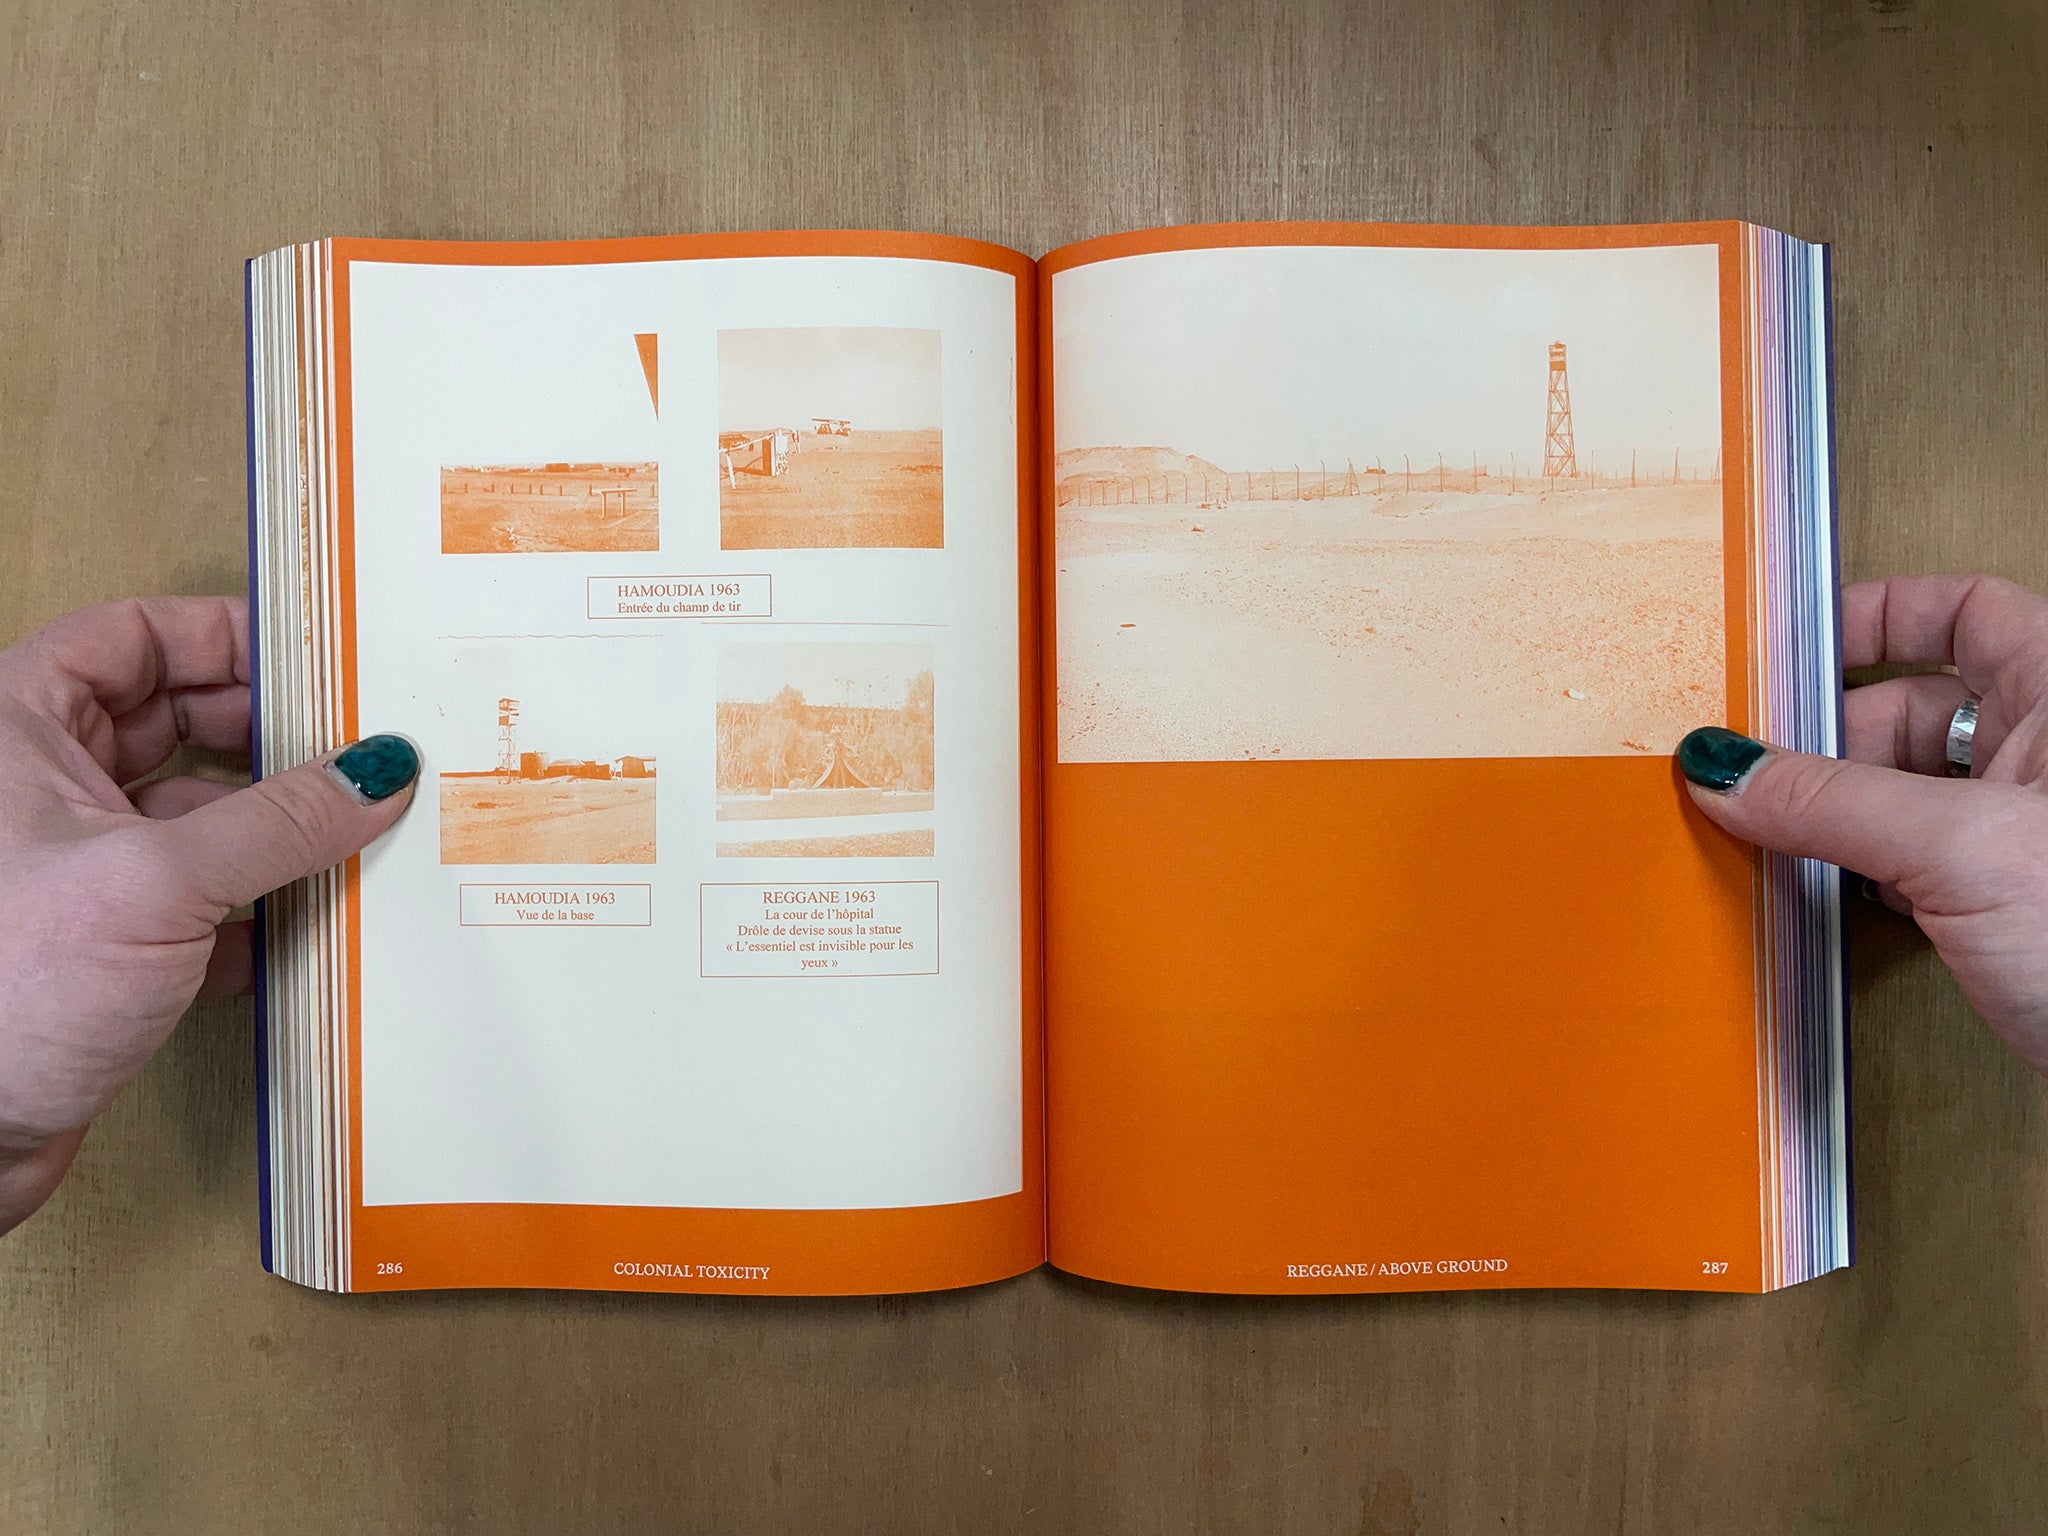 COLONIAL TOXICITY: REHEARSING FRENCH RADIOACTIVE ARCHITECTURE AND LANDSCAPE IN THE SAHARA by Samia Henni